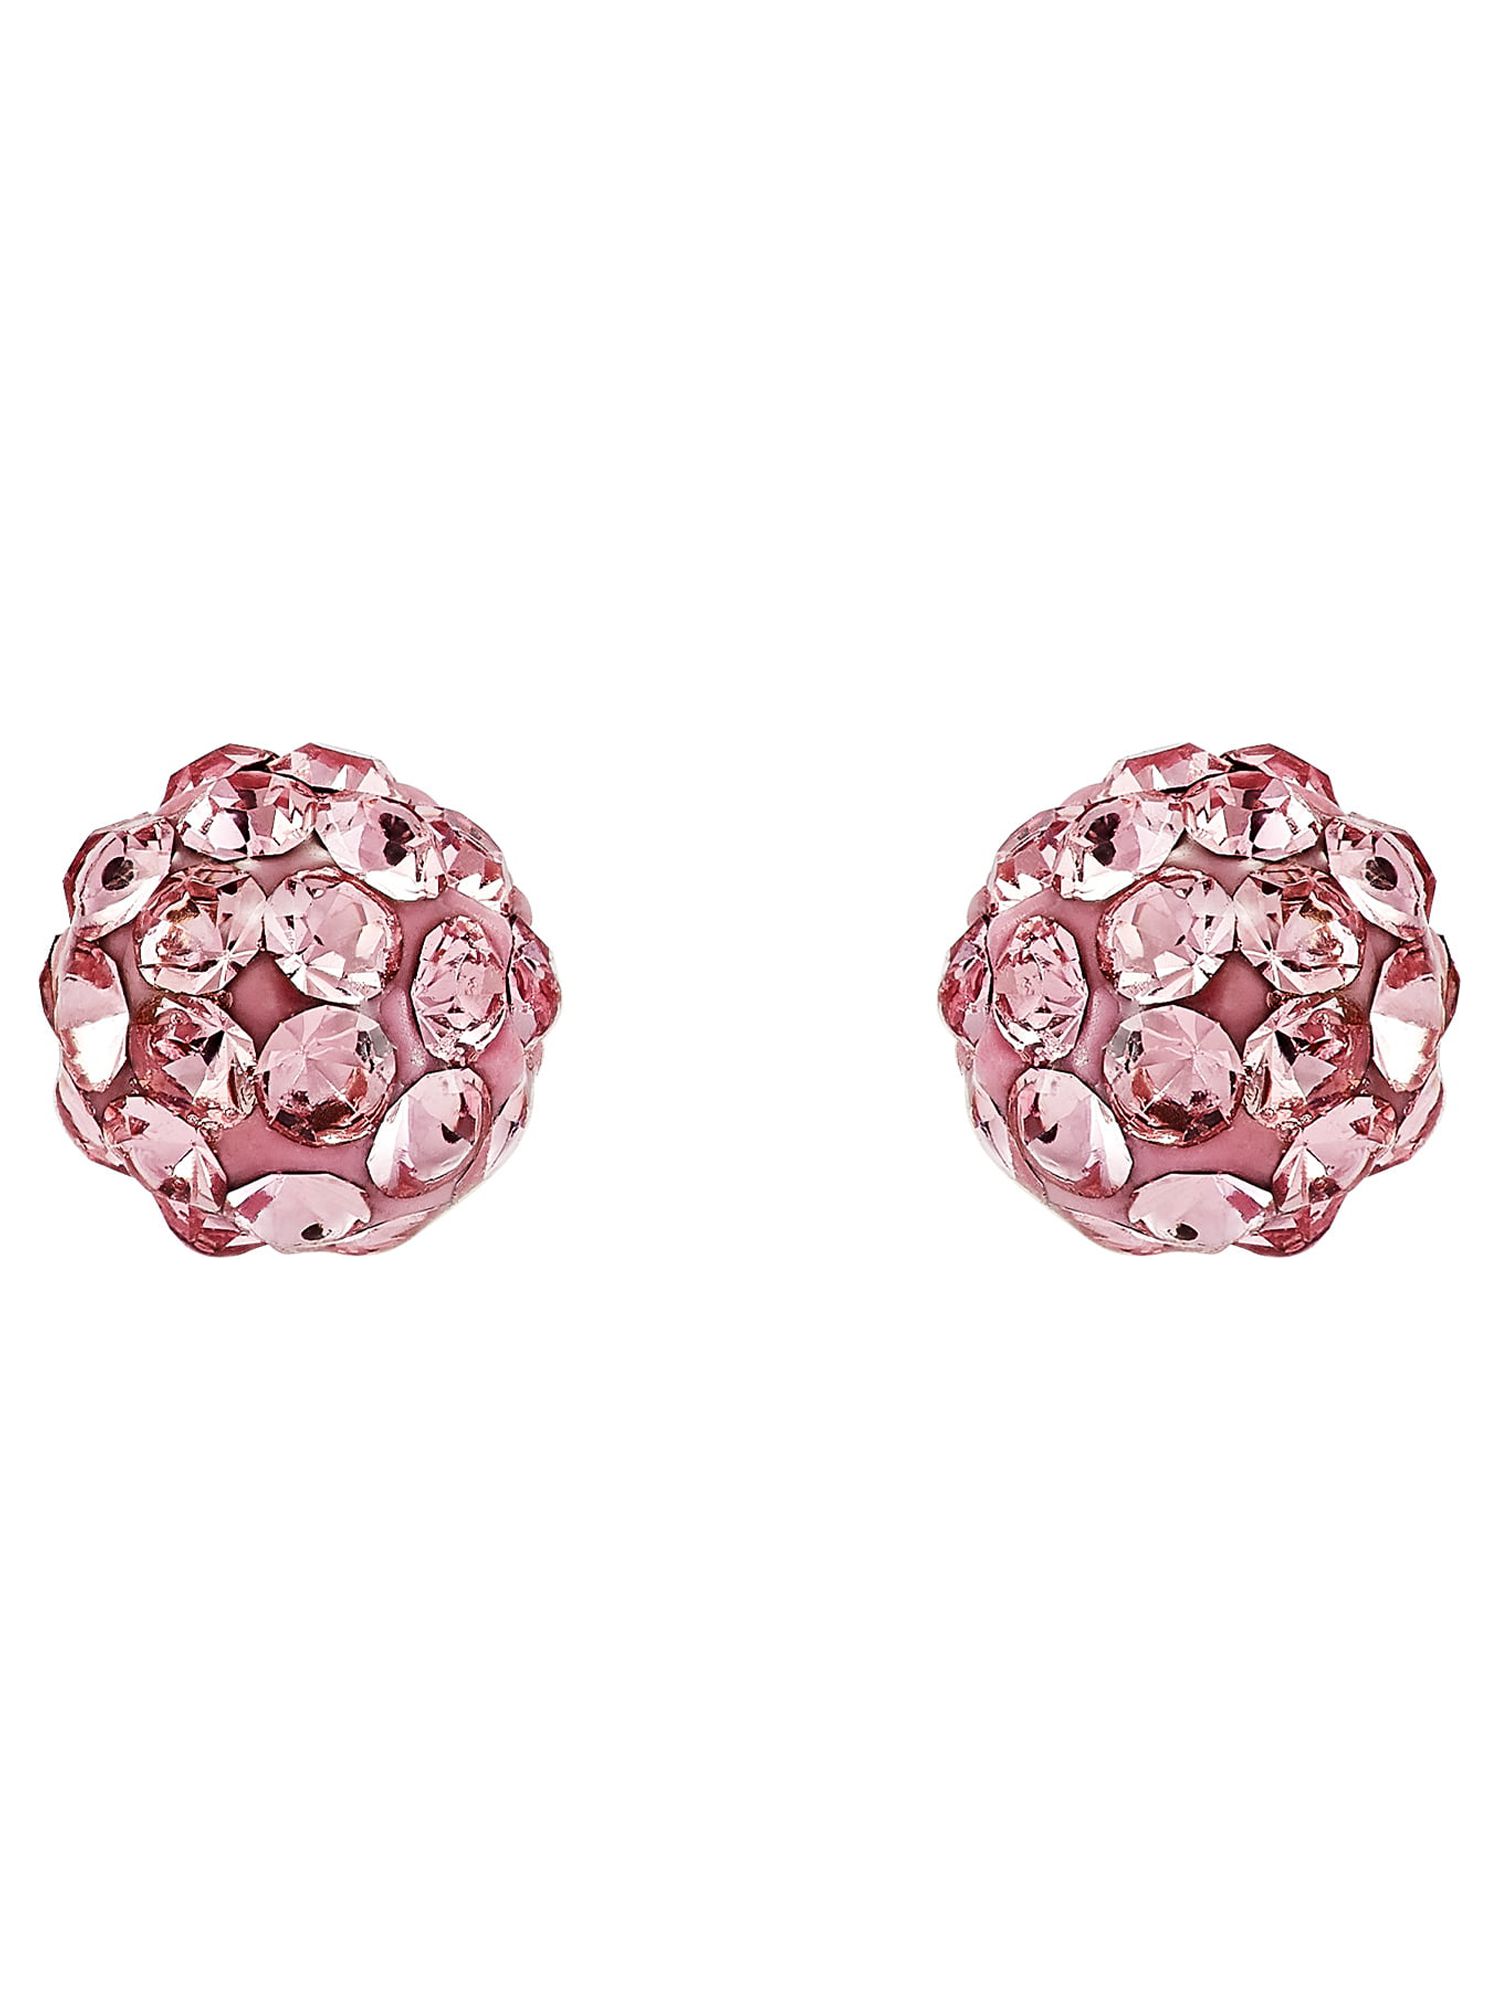 Brilliance Fine Jewelry Pink Crystals 4.8MM Studs Earrings in 10K Yellow Gold - image 3 of 10